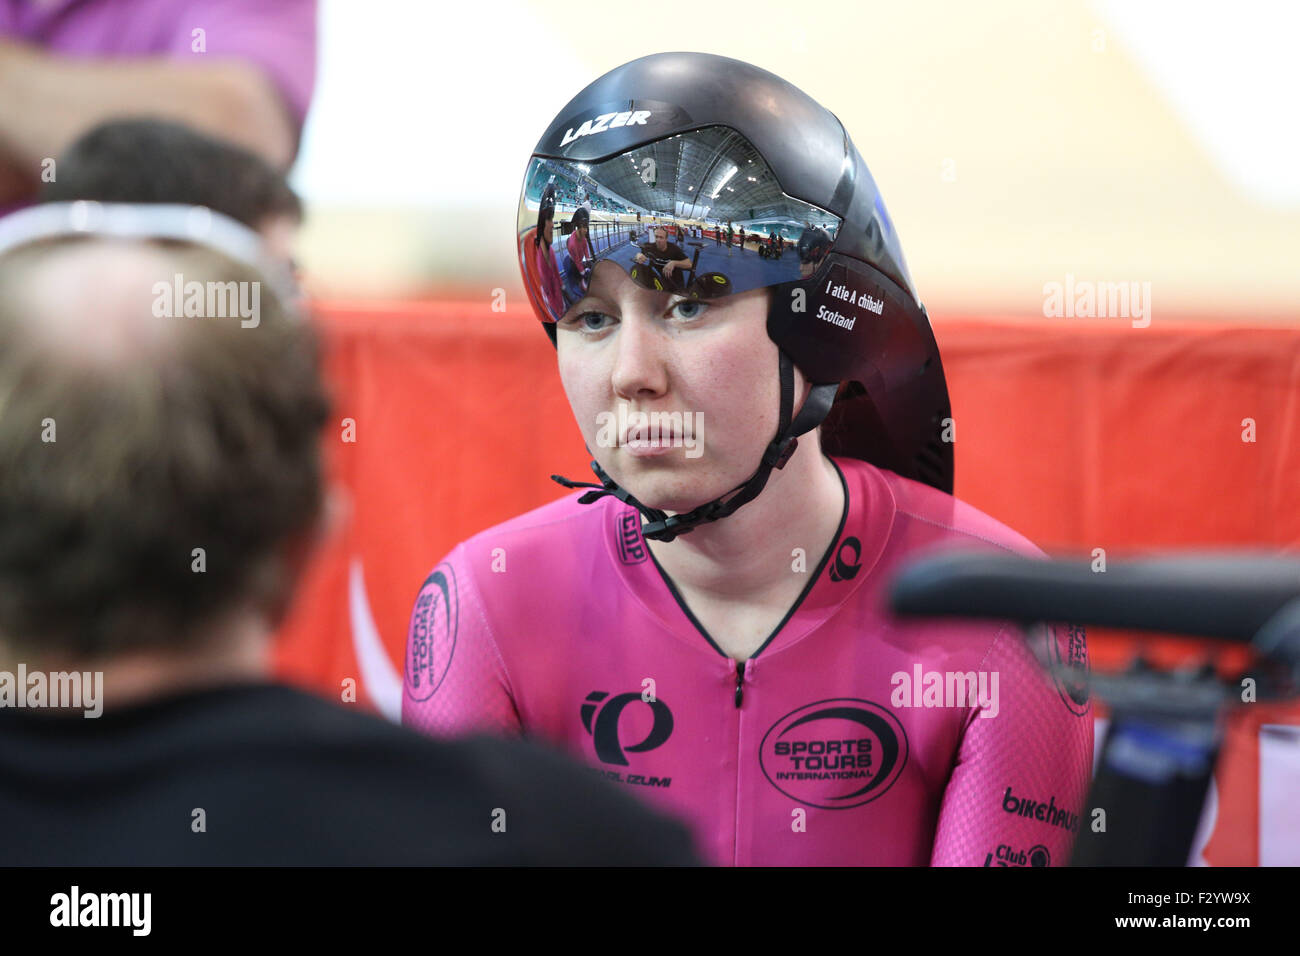 Manchester, UK. 26th Sep, 2015. Katie Archibald readies herself before competing in the Female Team Pursuit at the 2015 British Cycling National Track Championships at the National Cycling Centre in Manchester, UK. The annual event offers a unique opportunity for the public to see world class cyclists competing for the coveted British champions jerseys. Credit:  Ian Hinchliffe/Alamy Live News Stock Photo